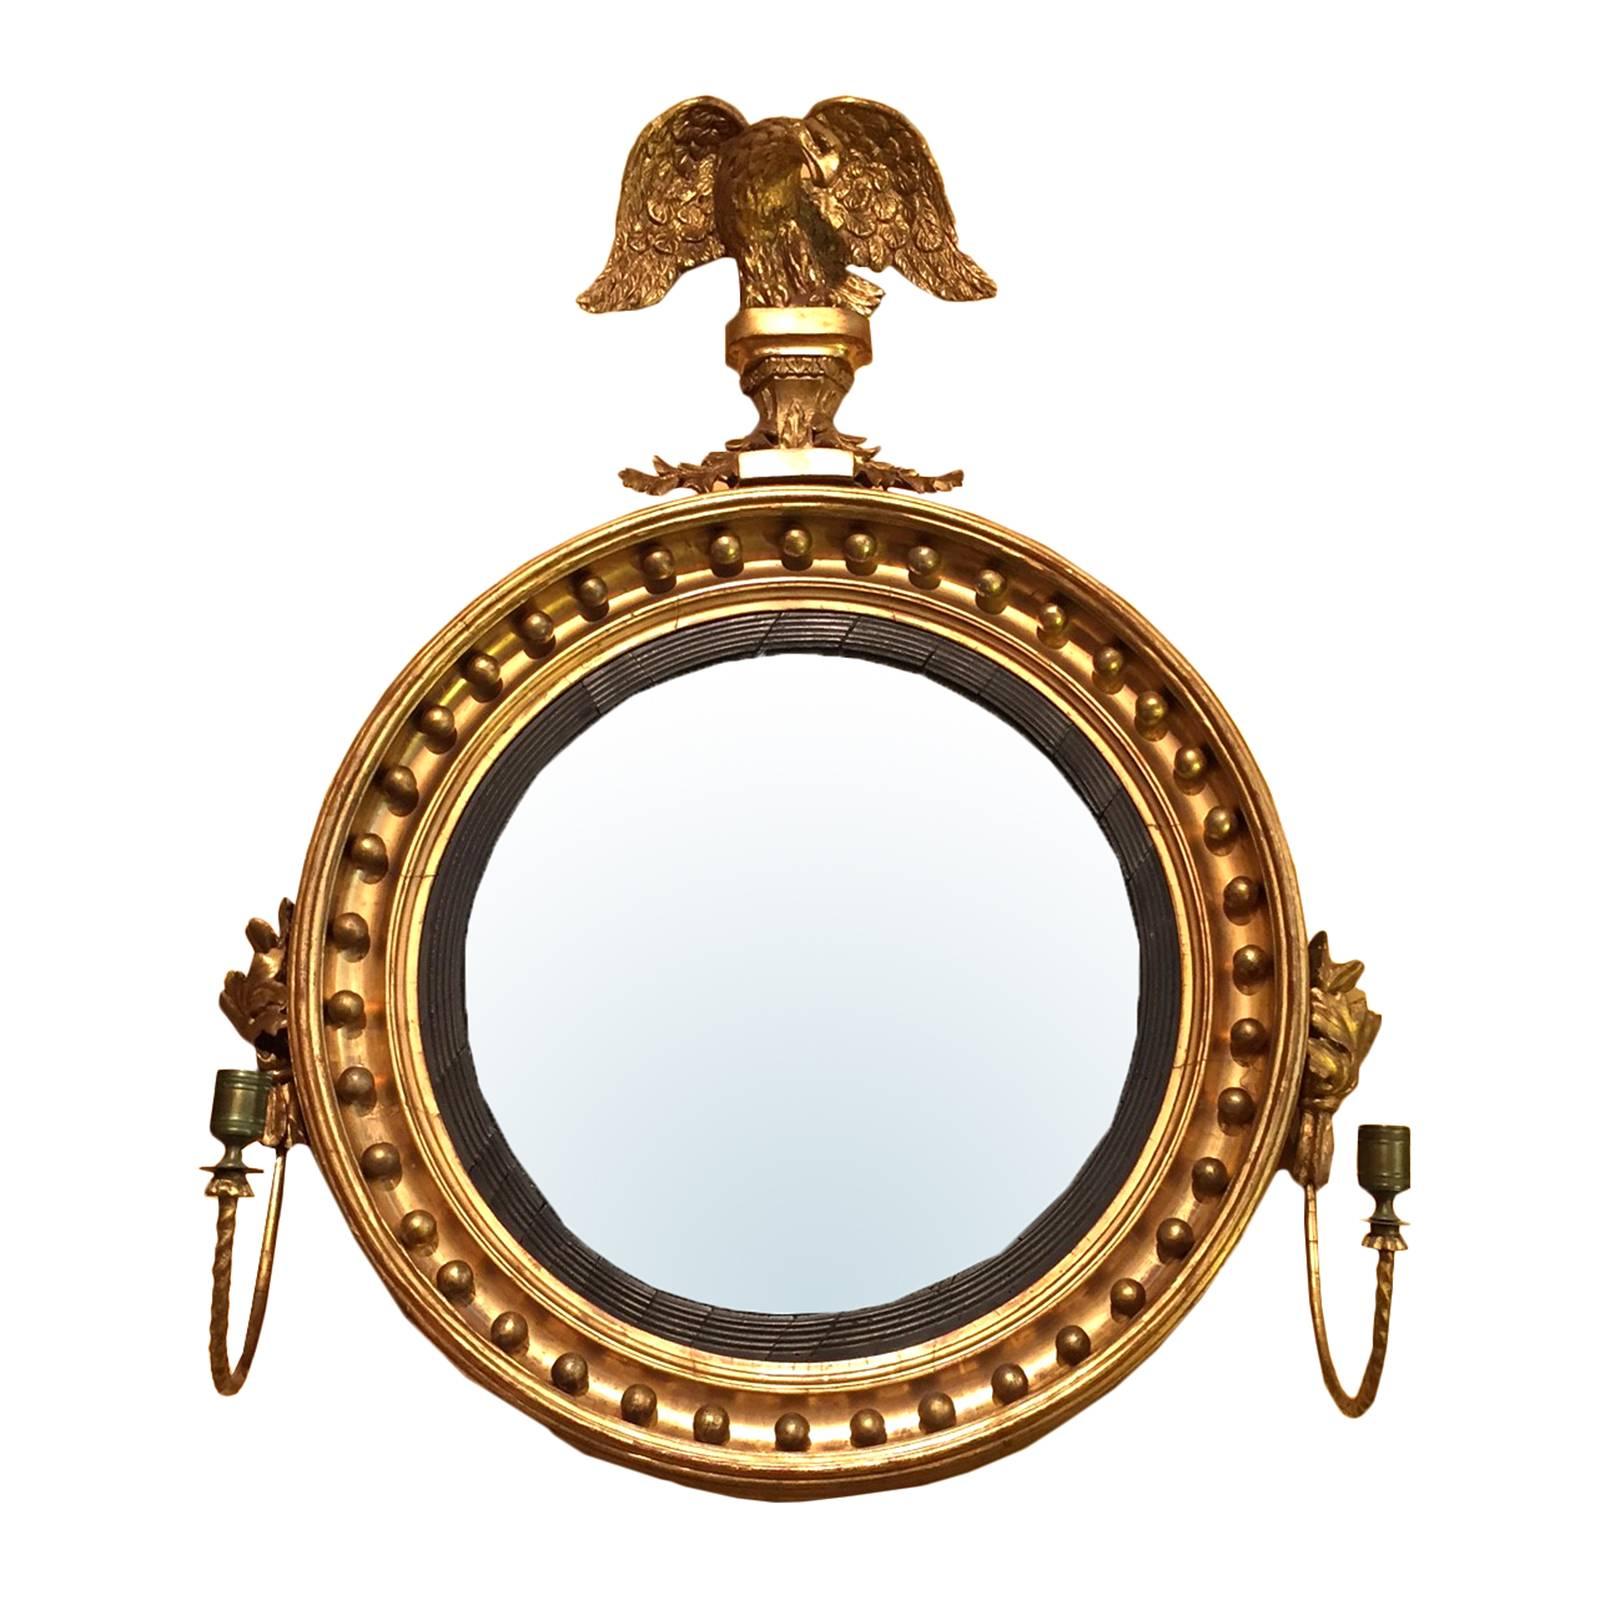 19th century American giltwood convex mirror with eagle and sconce, incredible scale.